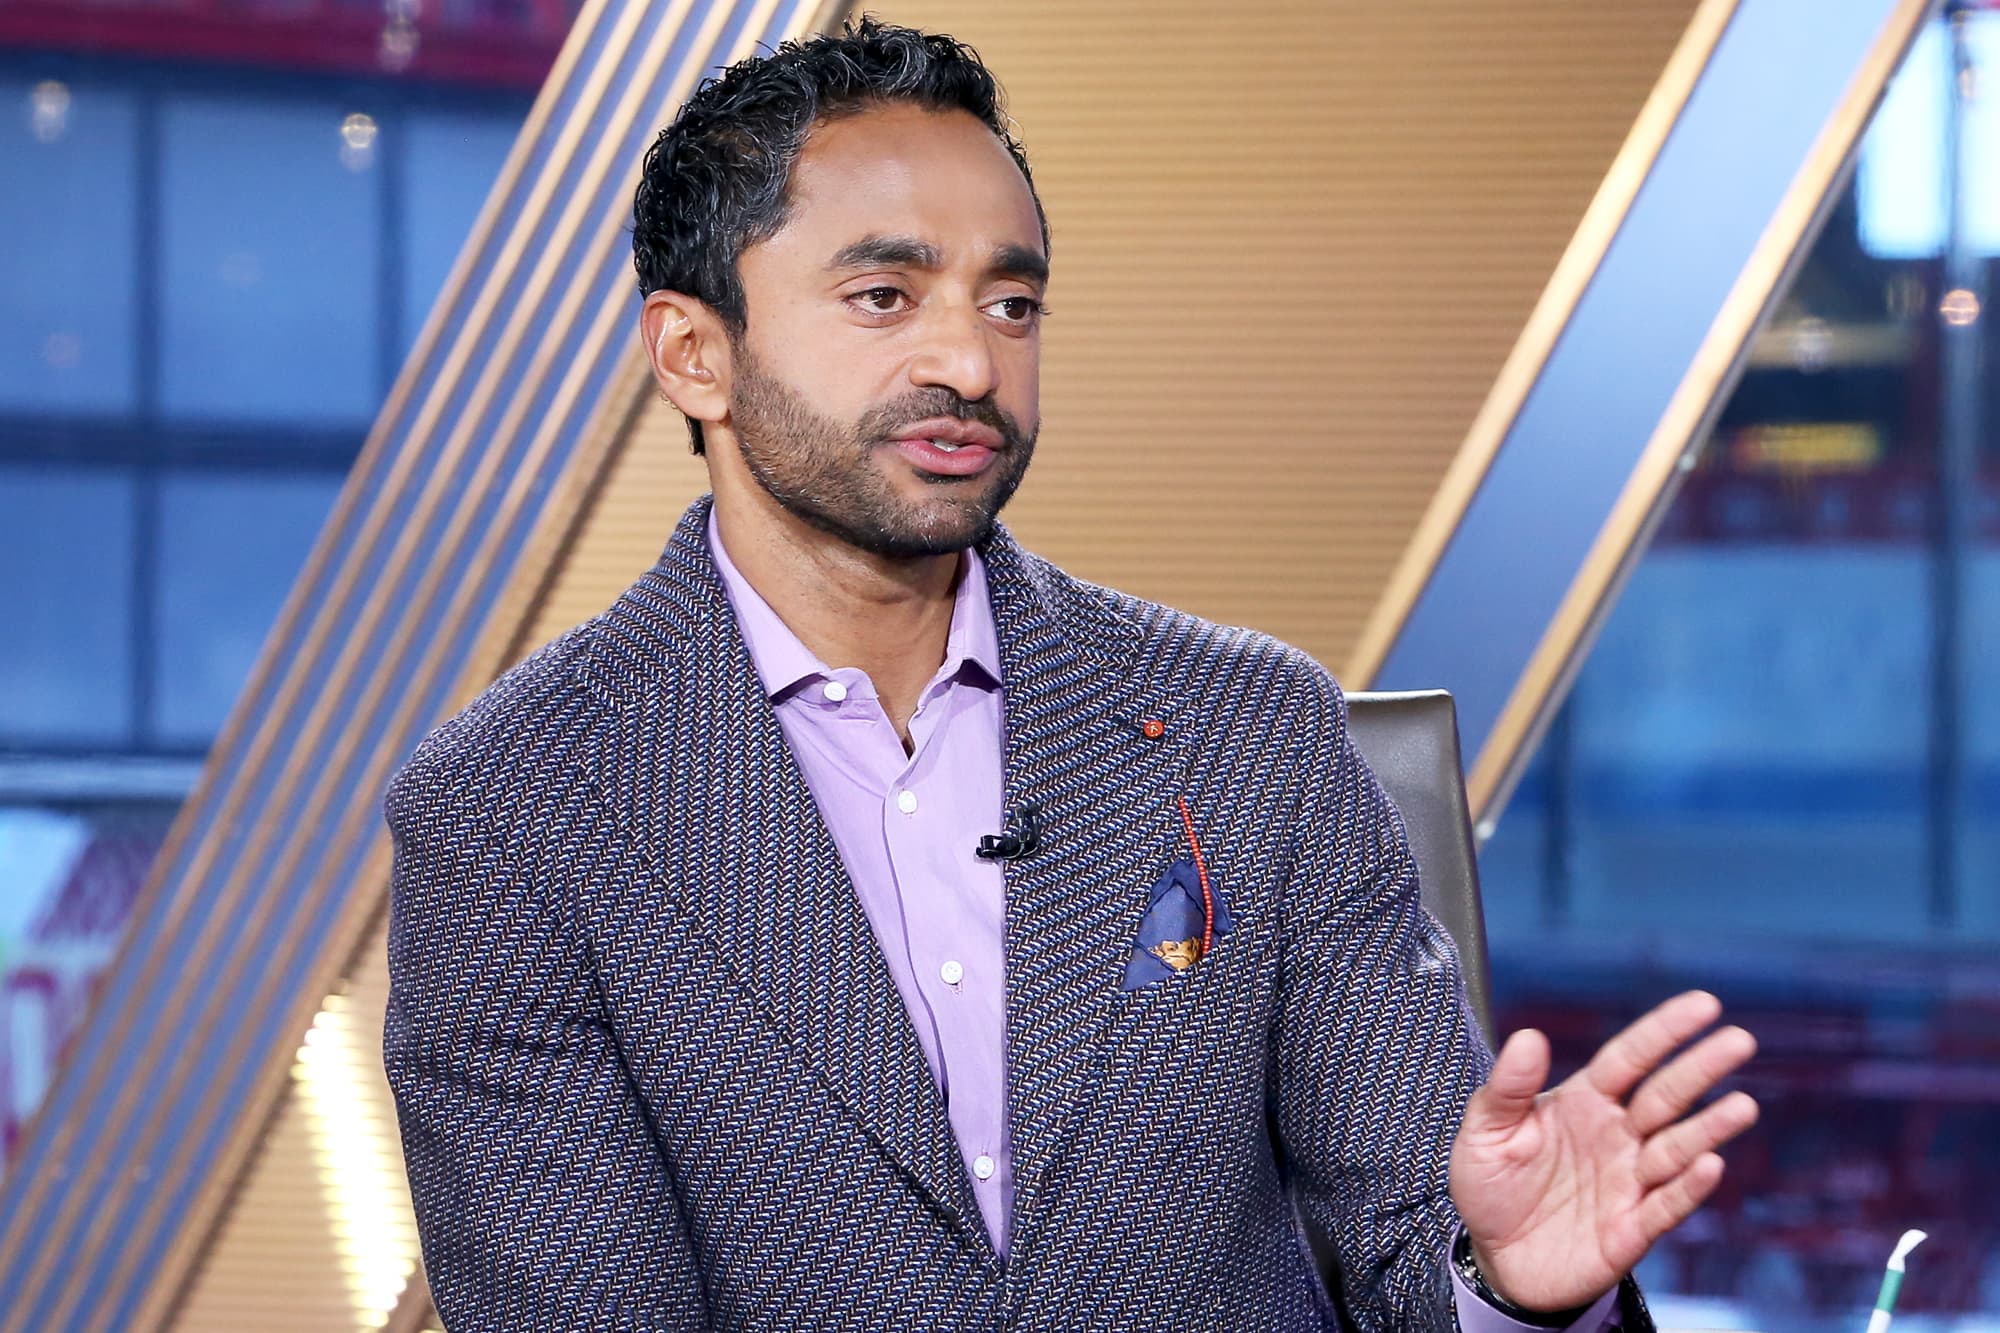 Clover Health, supported by Chamath Palihapitiya, receives notification of SEC investigation